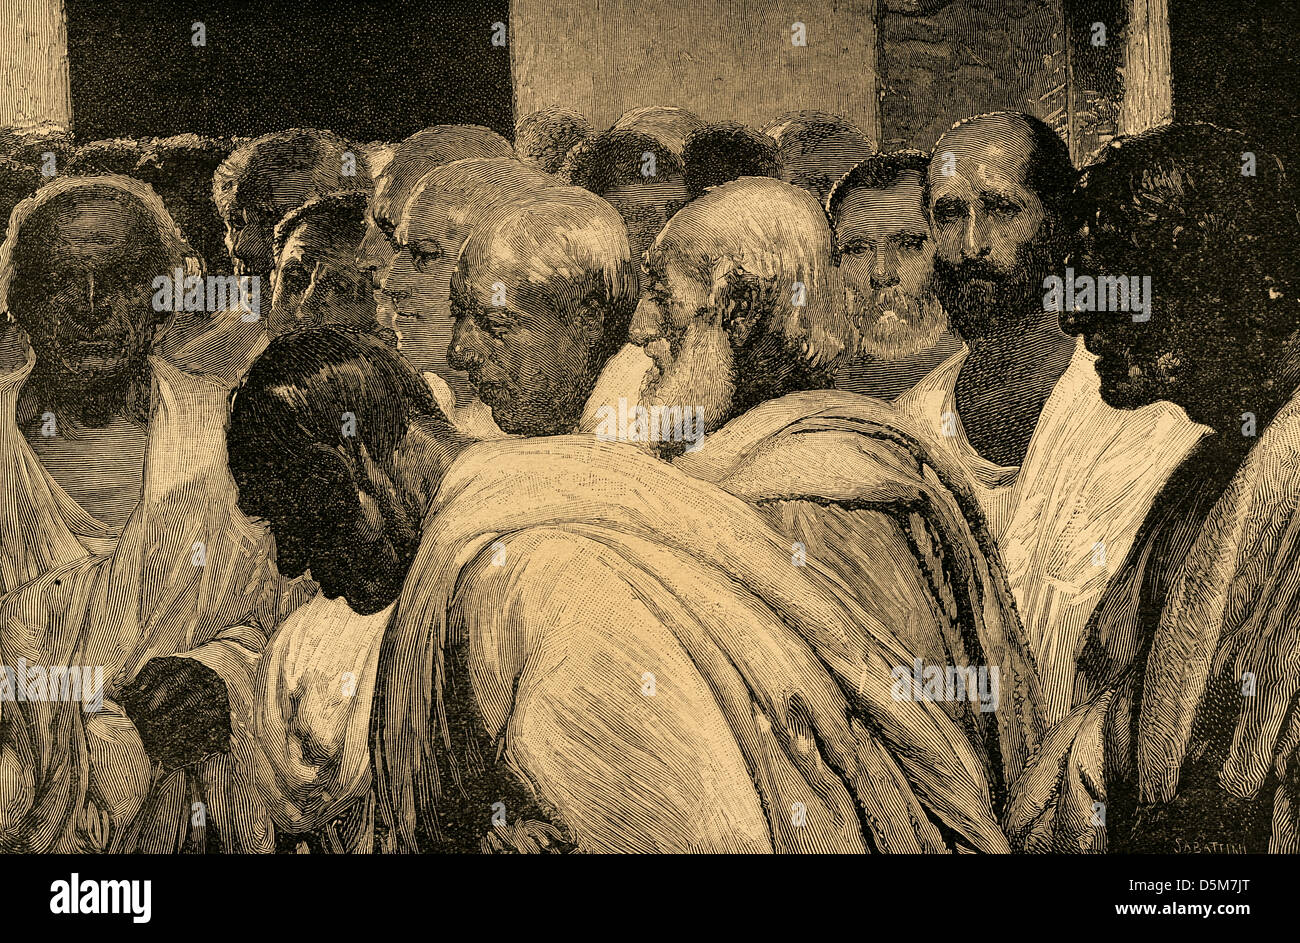 Appius Claudius the Censor (340-273 BC). Roman Censor. Engraving by Sabattini after a fresco by Cesare Maccari. Stock Photo